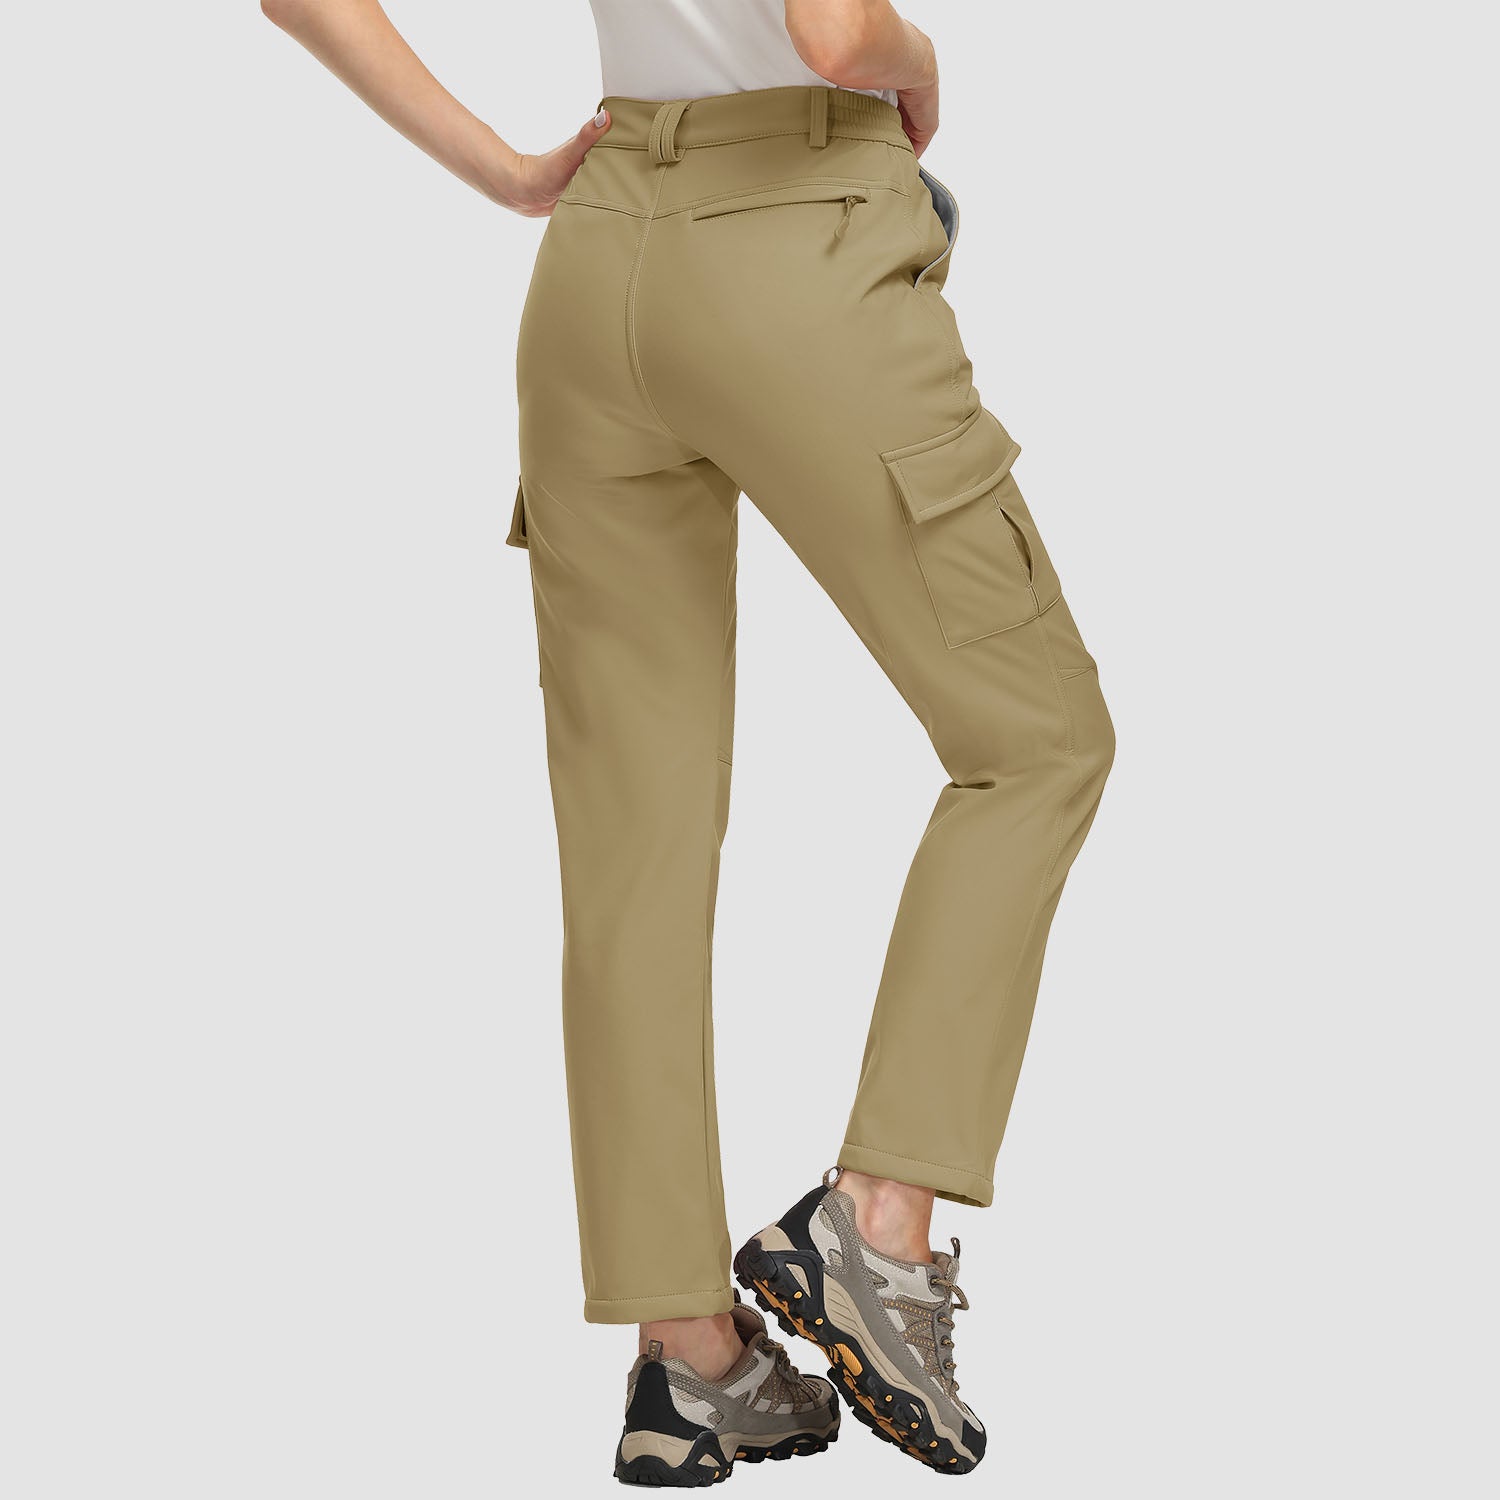 NEW Corduroy Women's Pants lined with soft fleece lining. Thick to